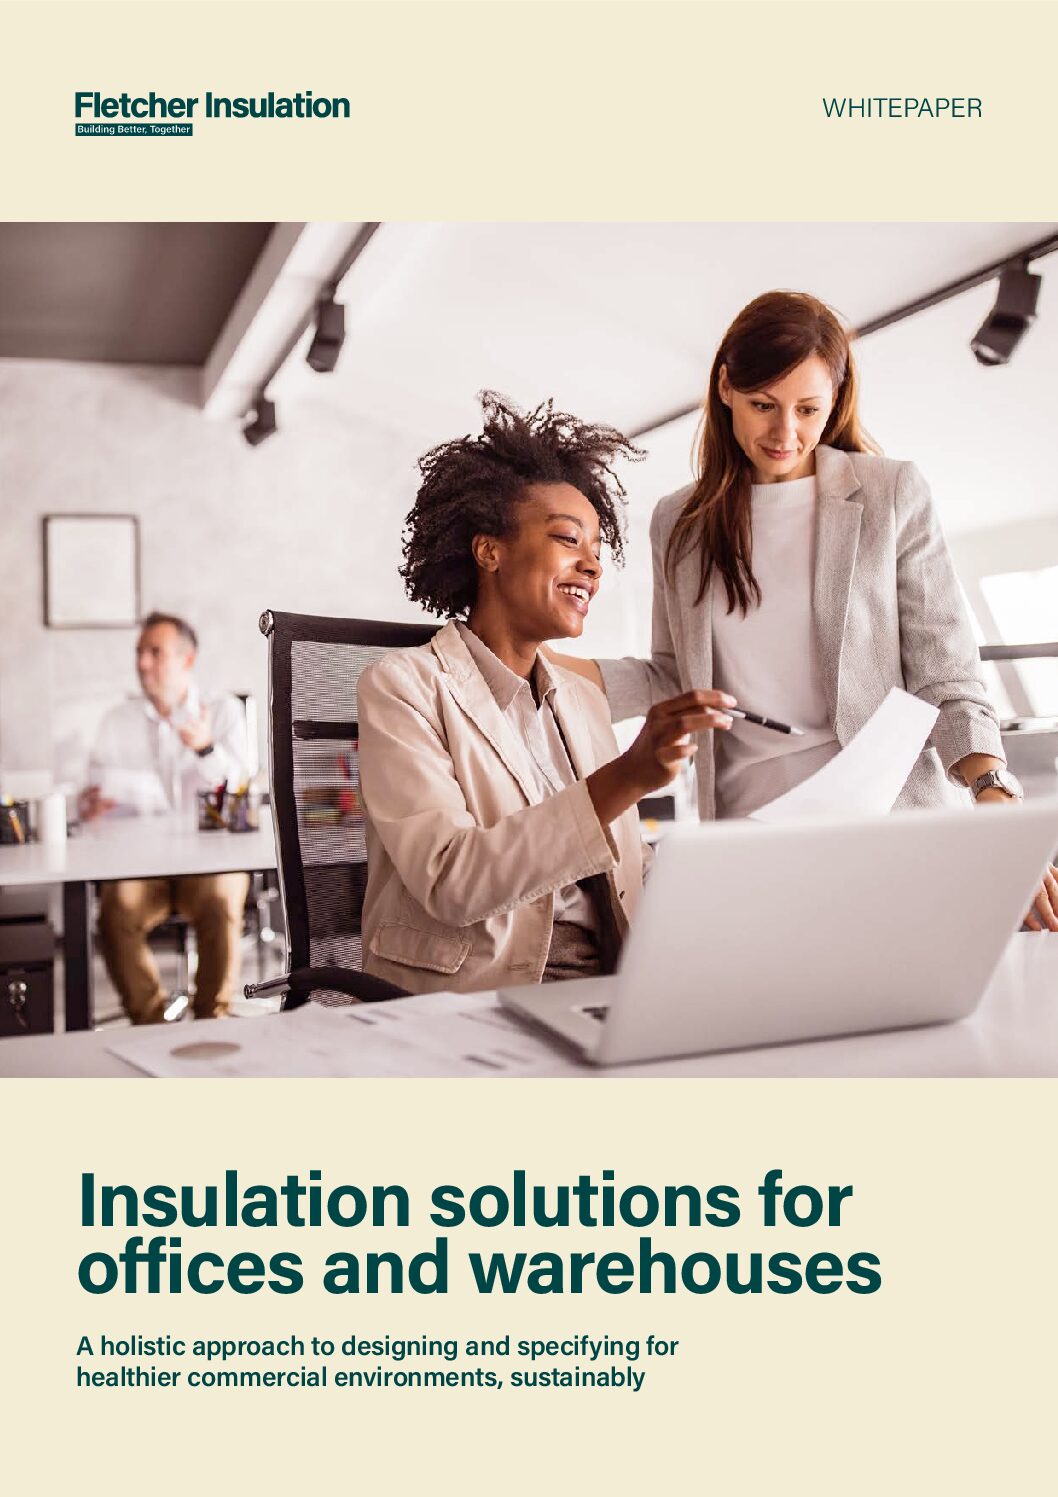 Whitepaper – Insulation Solutions for Offices & Warehouses